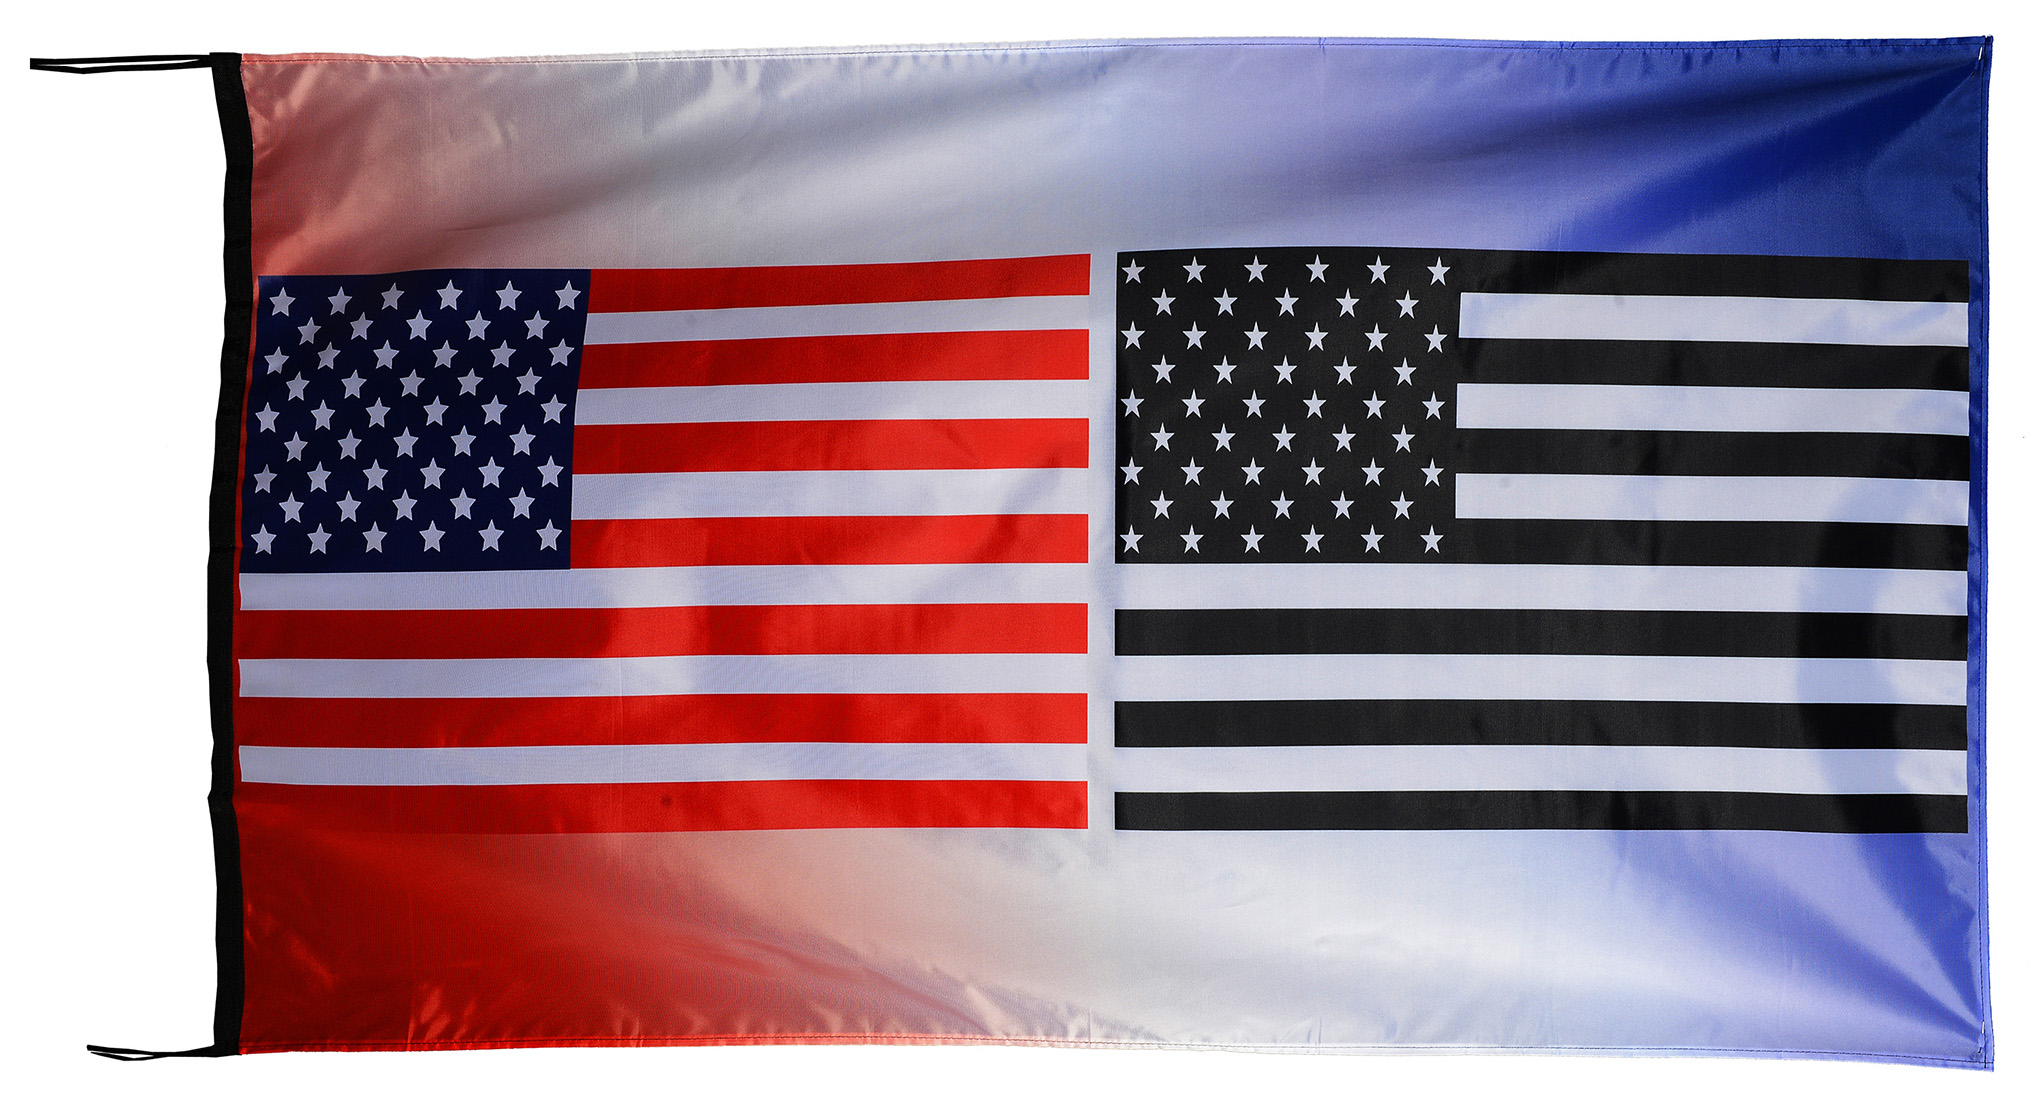 Flag  135 USA / US Country / United States Of America and Thin Blue Red Green Line / Patriotic / Pride Hybrid Weather-Resistant Polyester Outdoor Flag Landscape Banner / Vivid Colors / 3 X 5 FT (150 x 90cm) International Flags for Sale